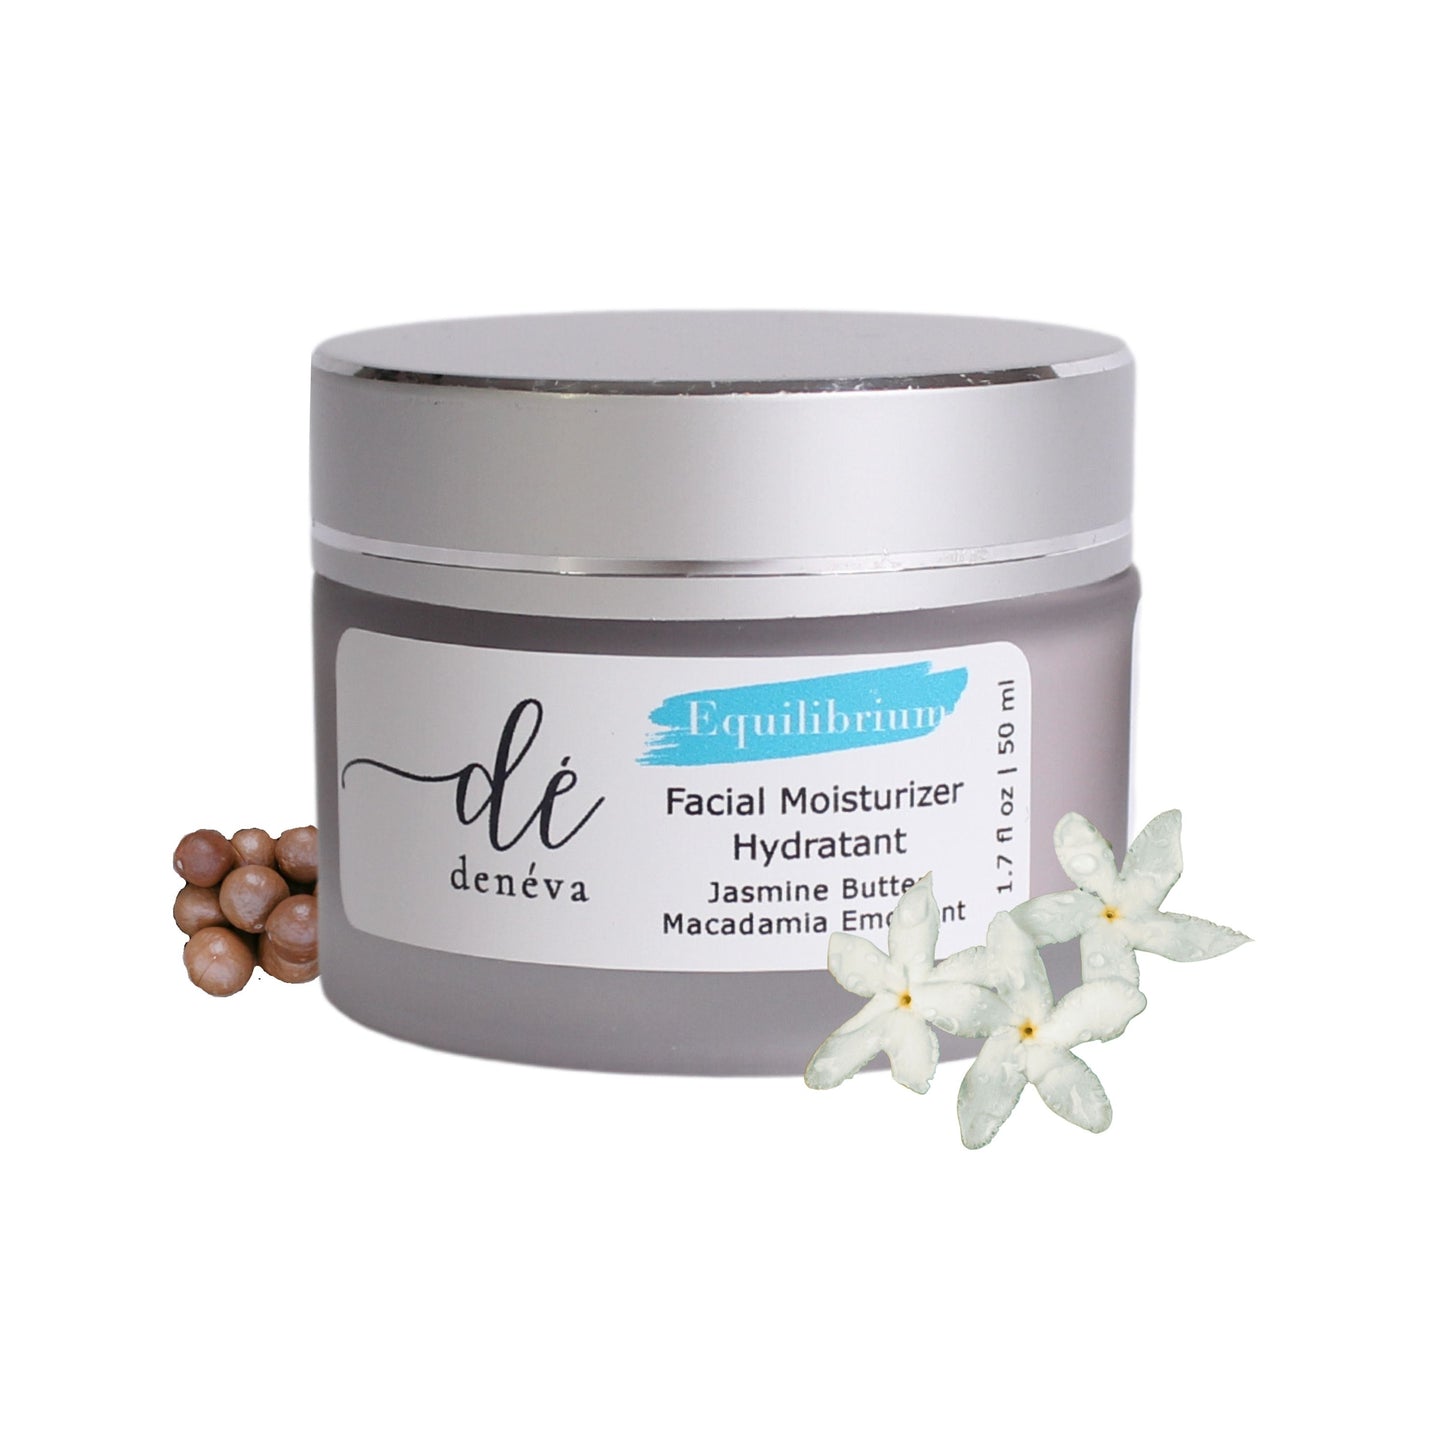 Equilibrium Facial Moisturizer - For Dry & Dehydrated Skin